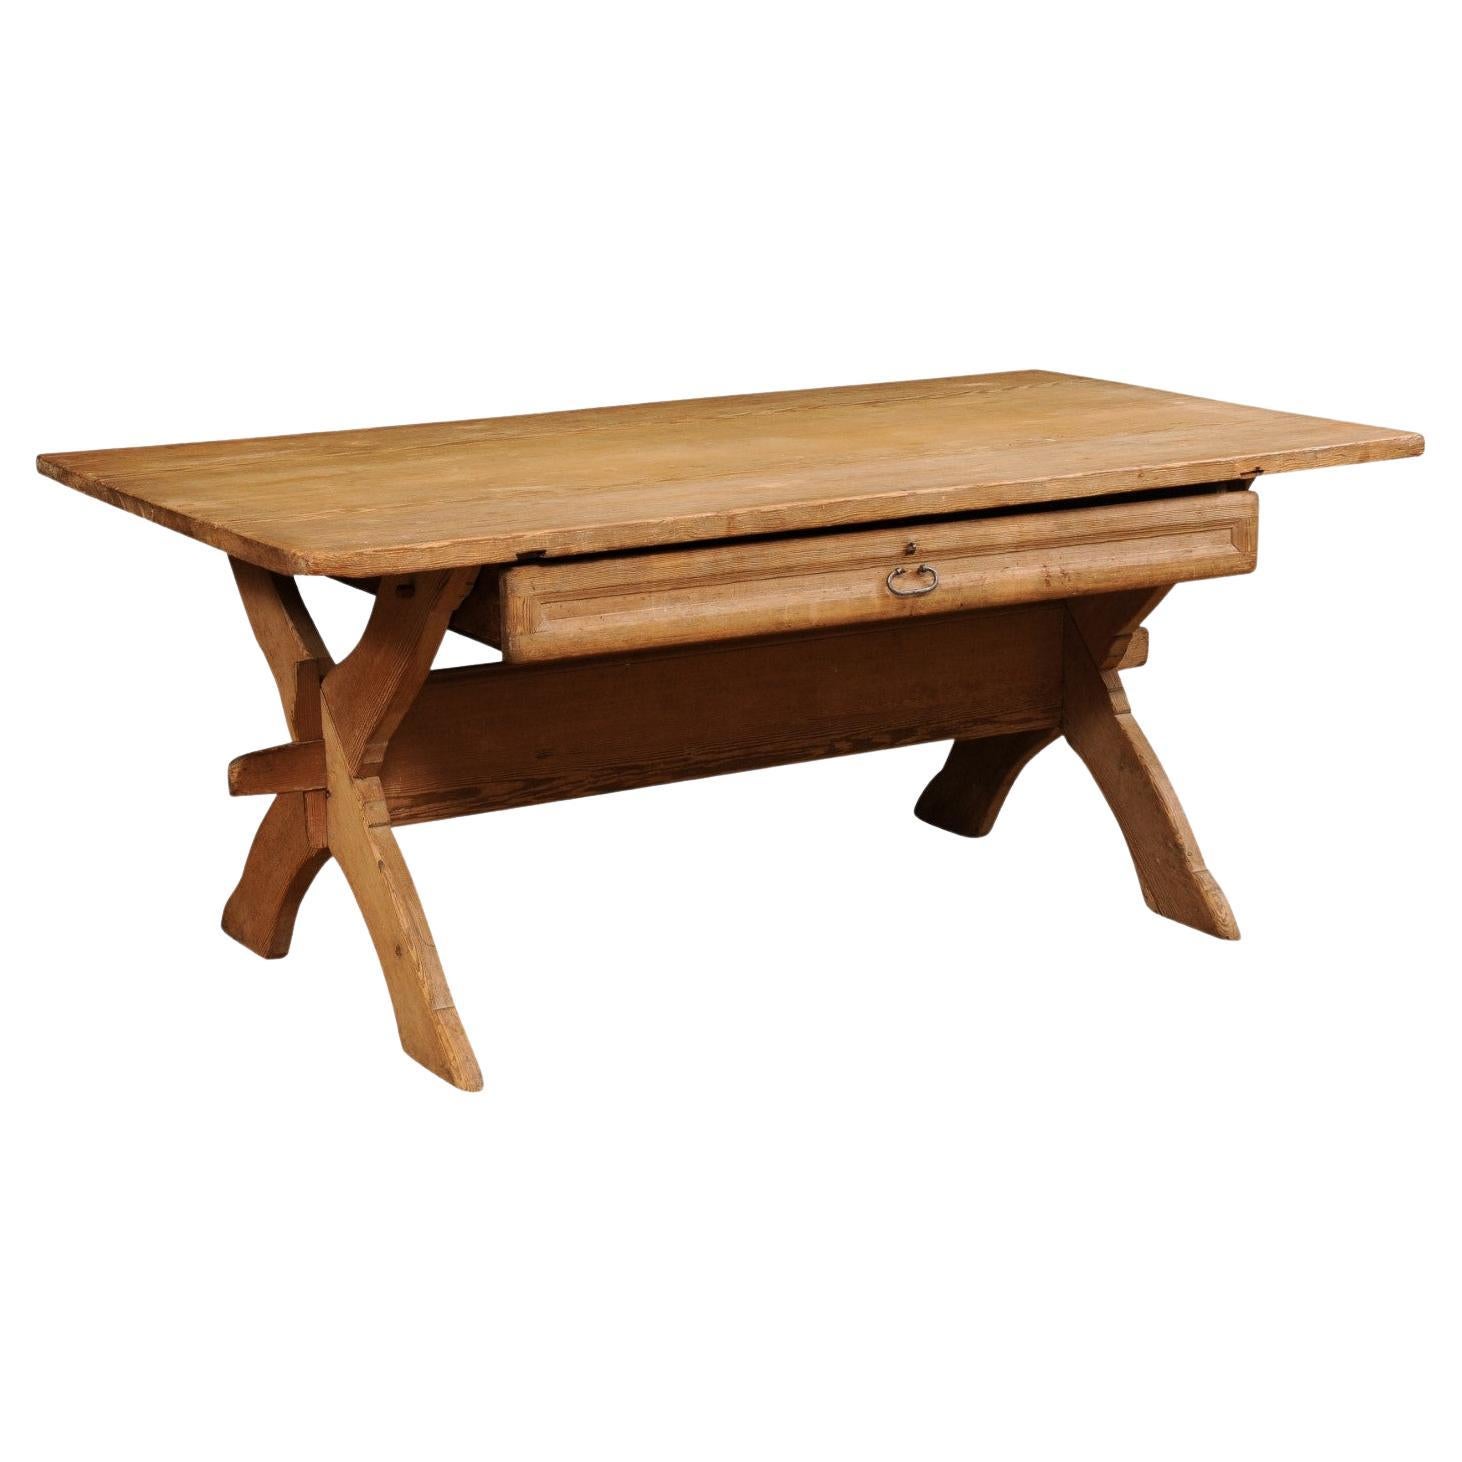 Swedish 1790s European Pine Sawbuck Table with Drawer and Double X-Form Legs For Sale